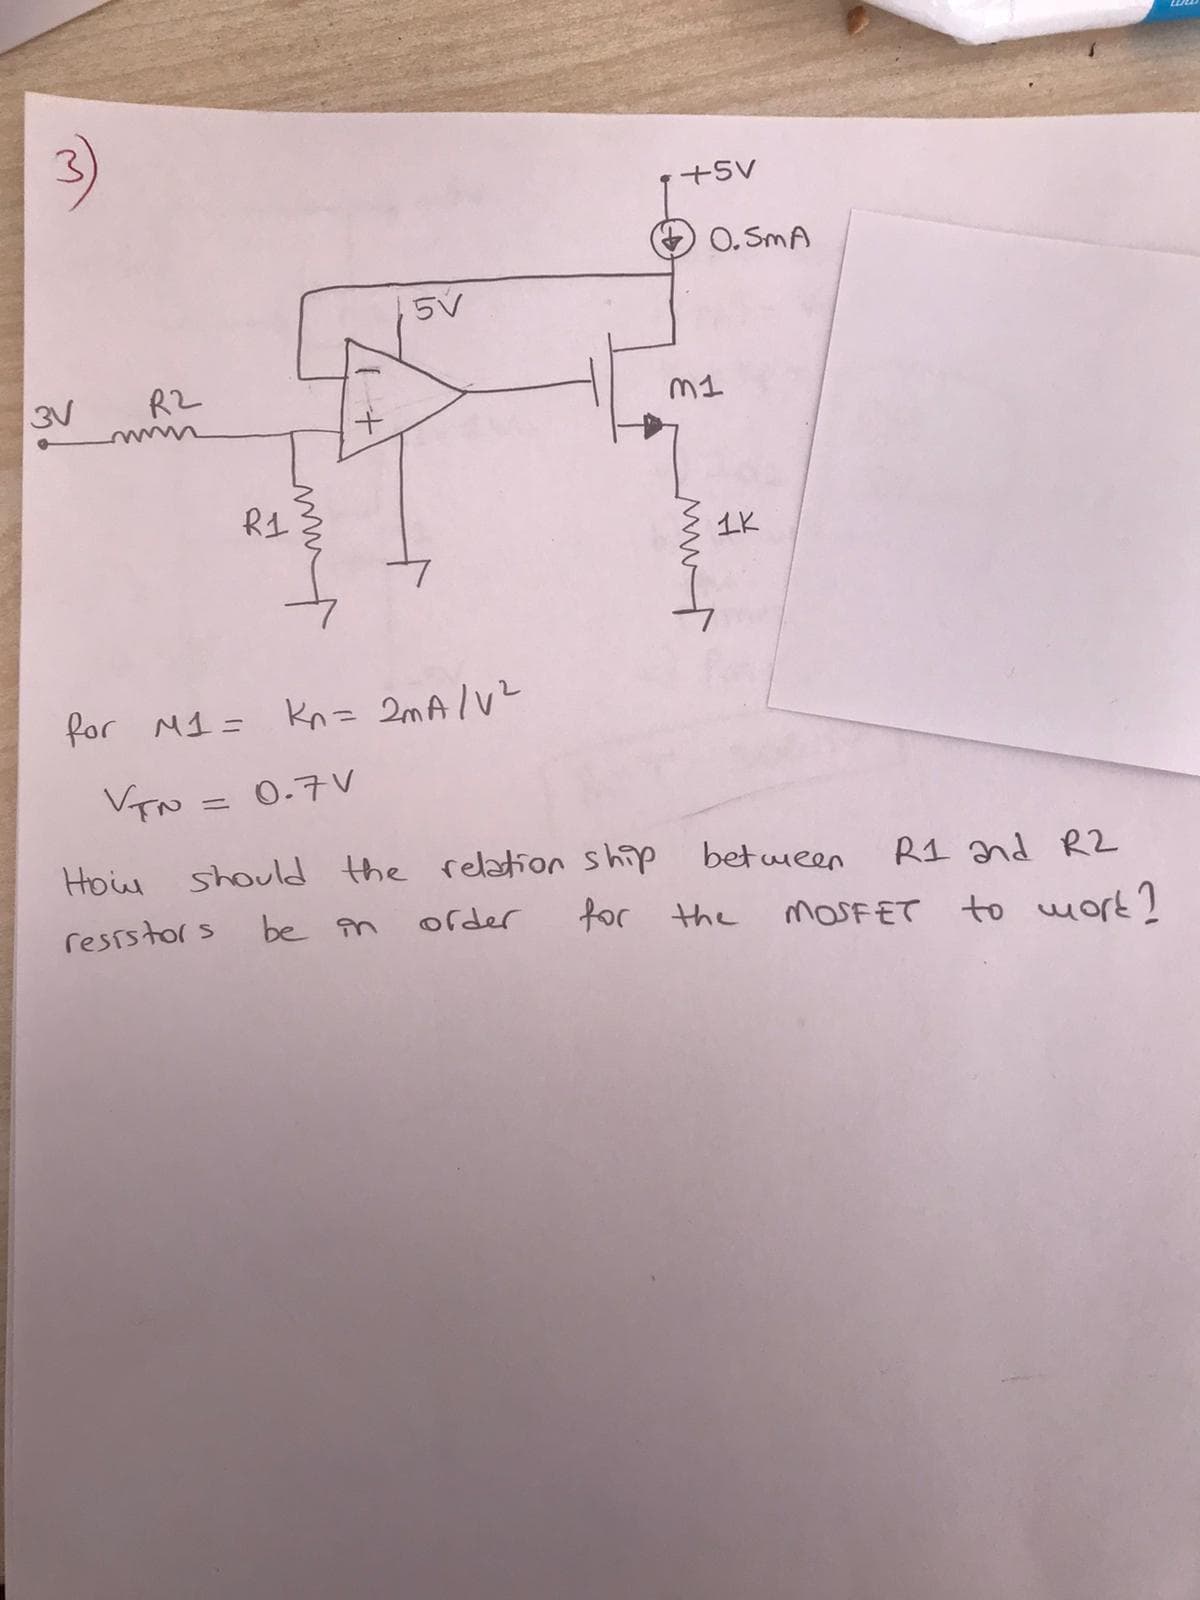 3)
+5V
O. SmA
3V
R2
M1
R1
1K
for M1= Kn= 2MAIVZ
0-7V
%3D
How should the relation ship between
R1 and R2
ressstors
be in
ofder
for the
MOSFET to wort?
